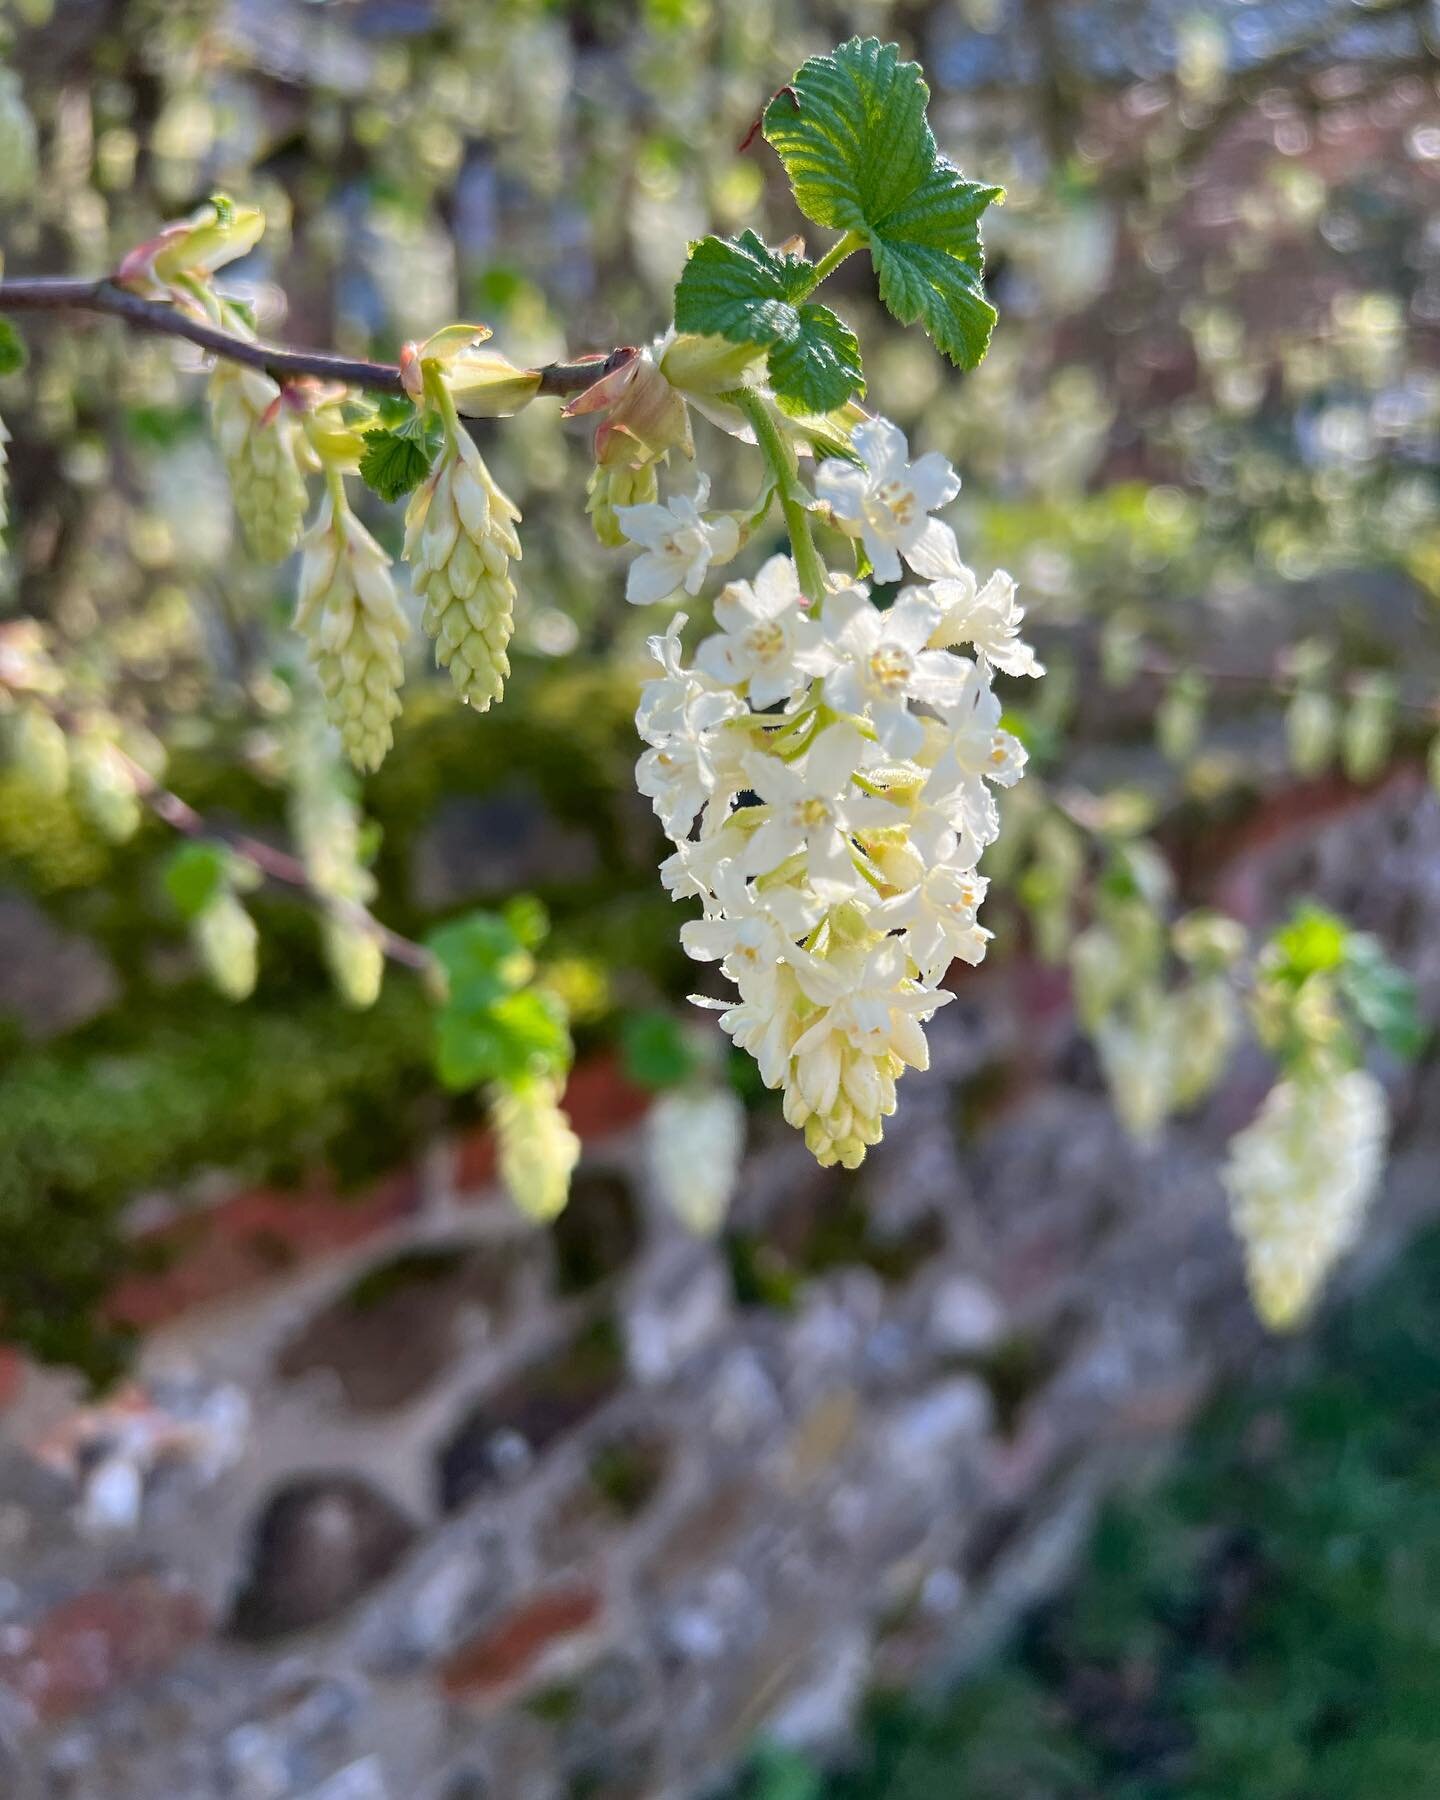 These little beauties caught my eye yesterday on a glorious sunny spring day. Ribes sanguineum &lsquo;White Icicle&rsquo; in flower in March which seems early, especially in N Norfolk. This flowering currant will grow to 1.5m high, 1.5m wide and like